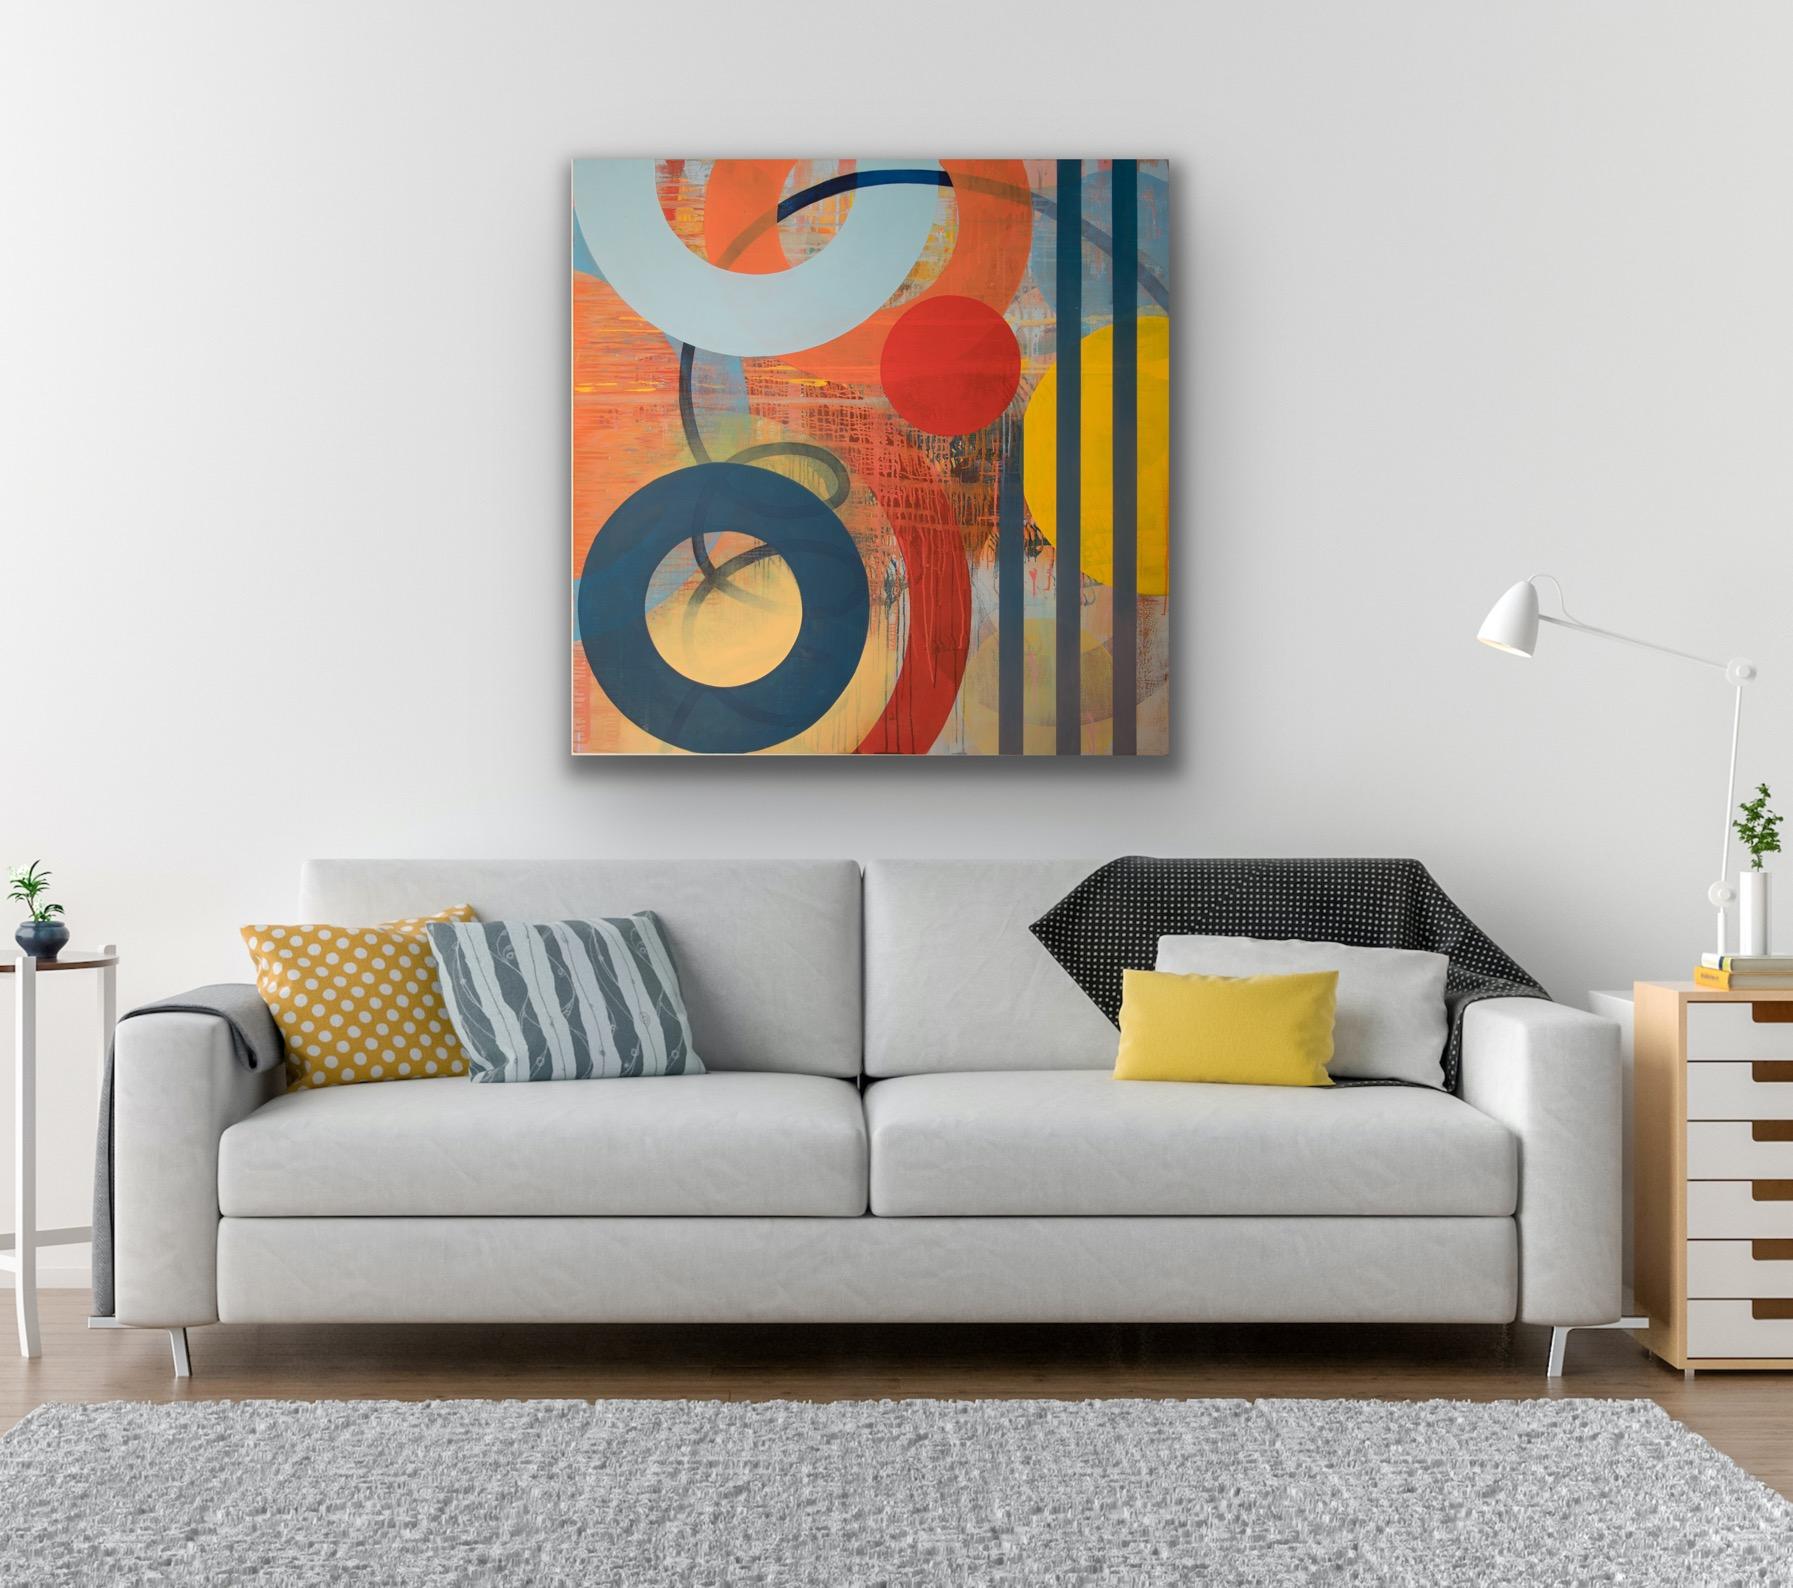 Square Contemporary Geometric Abstract in Orange and Blue - Float - Painting by Linda Kamille Schmidt